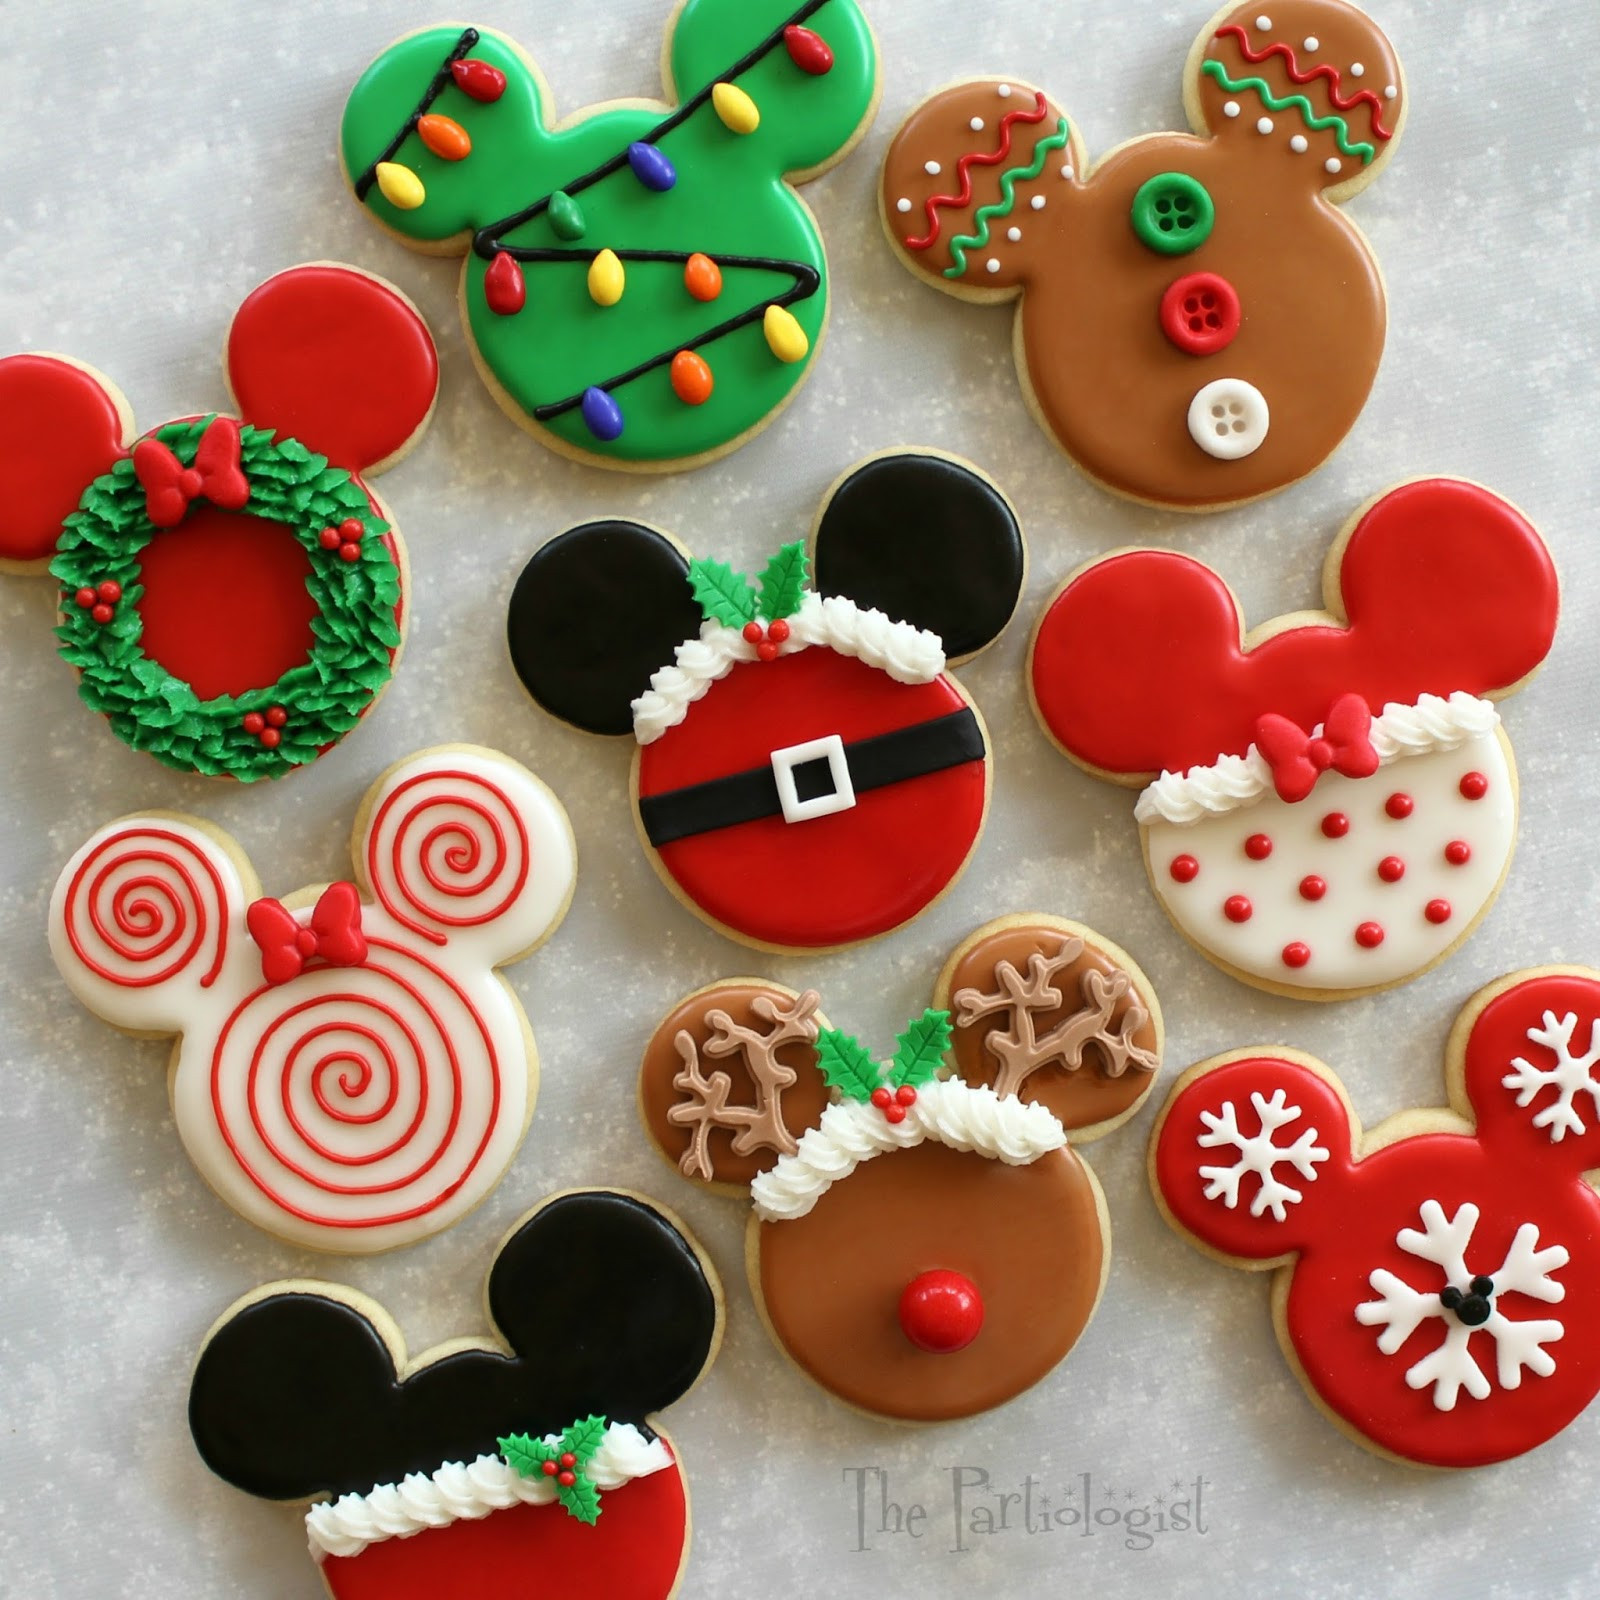 Christmas Cookies Decorating Ideas
 The Partiologist Disney Themed Christmas Cookies